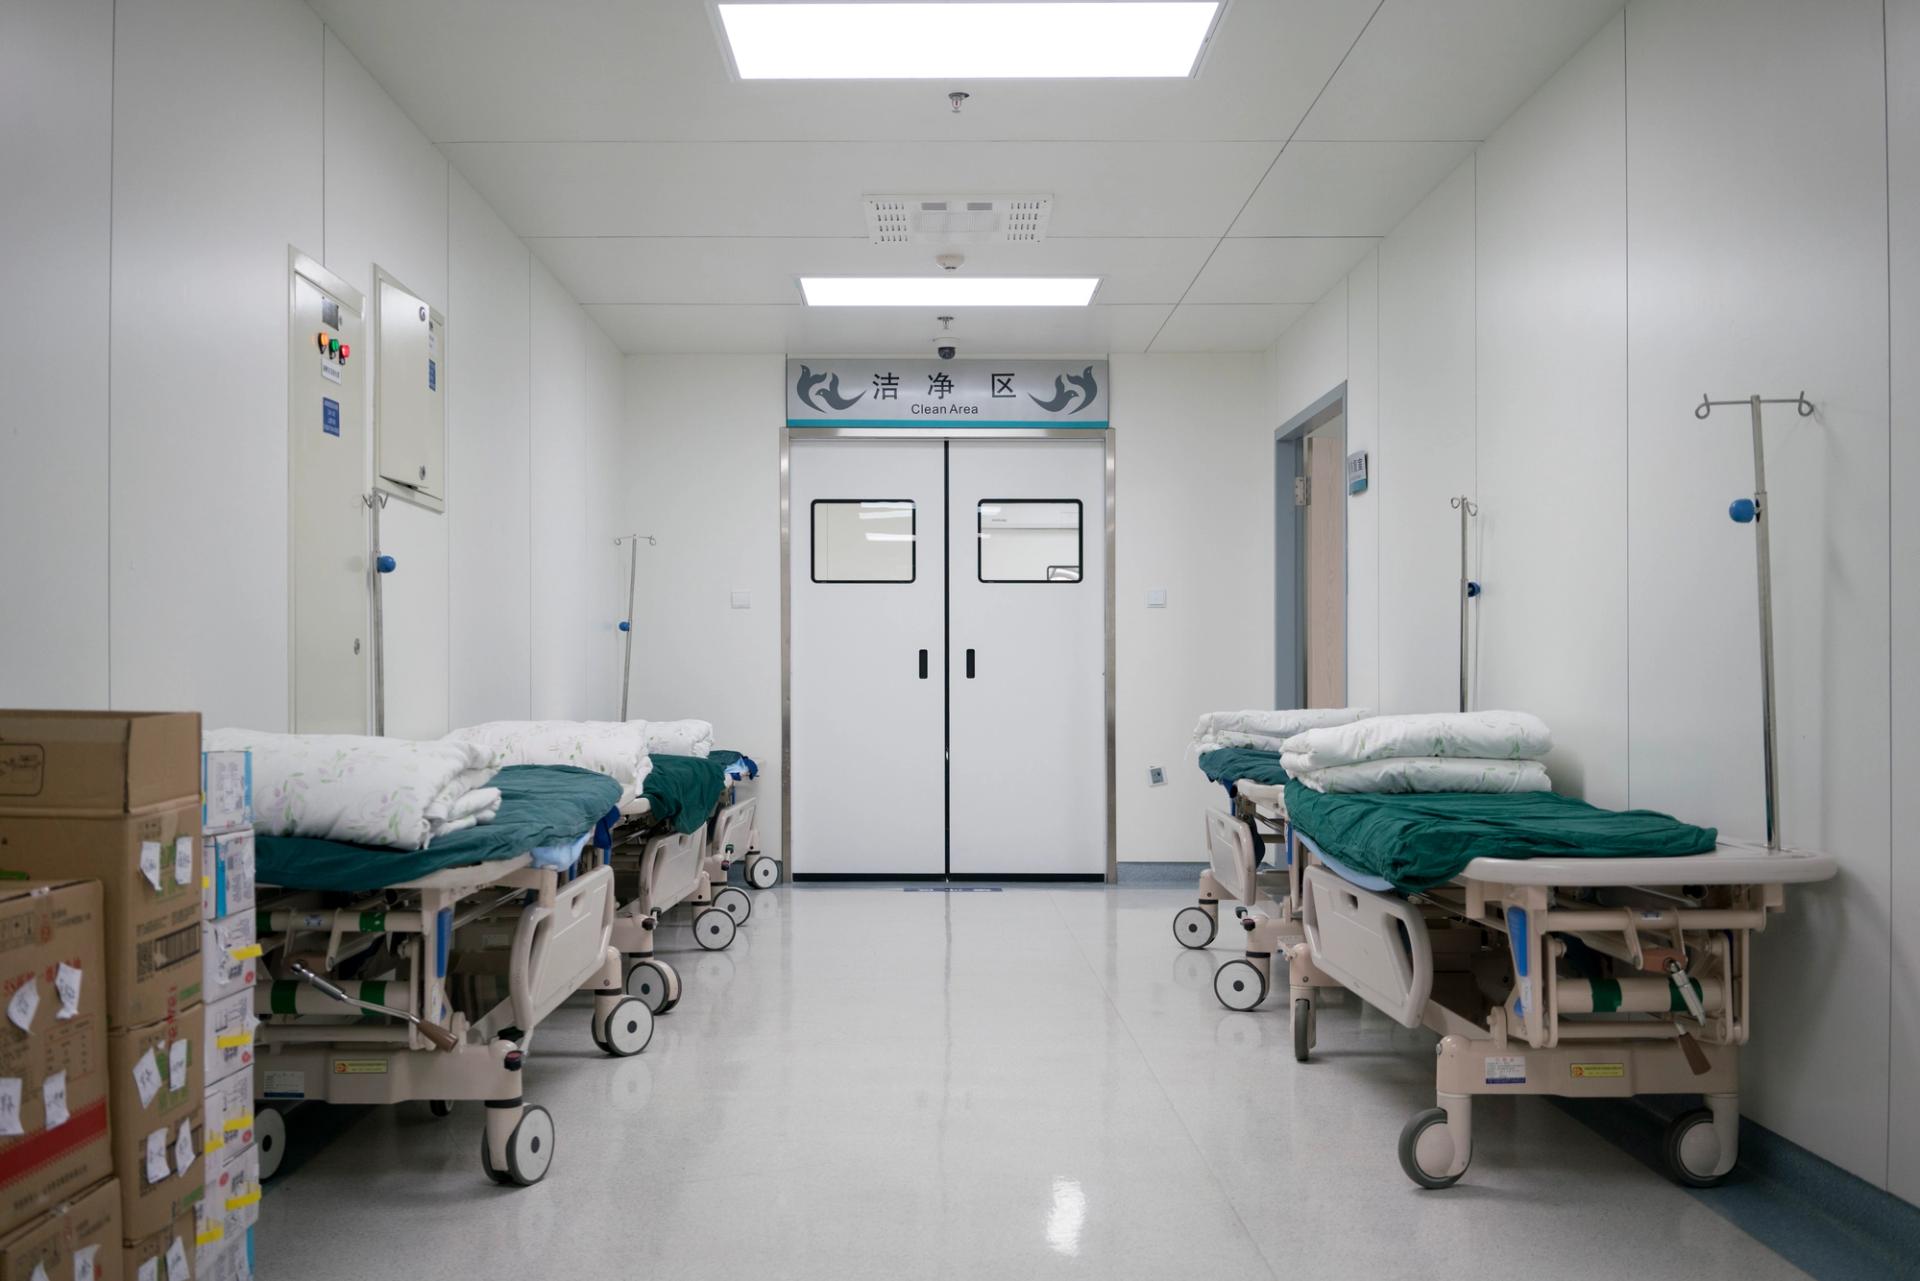 A corridor in the surgery department of the Beijing Friendship Hospital. 